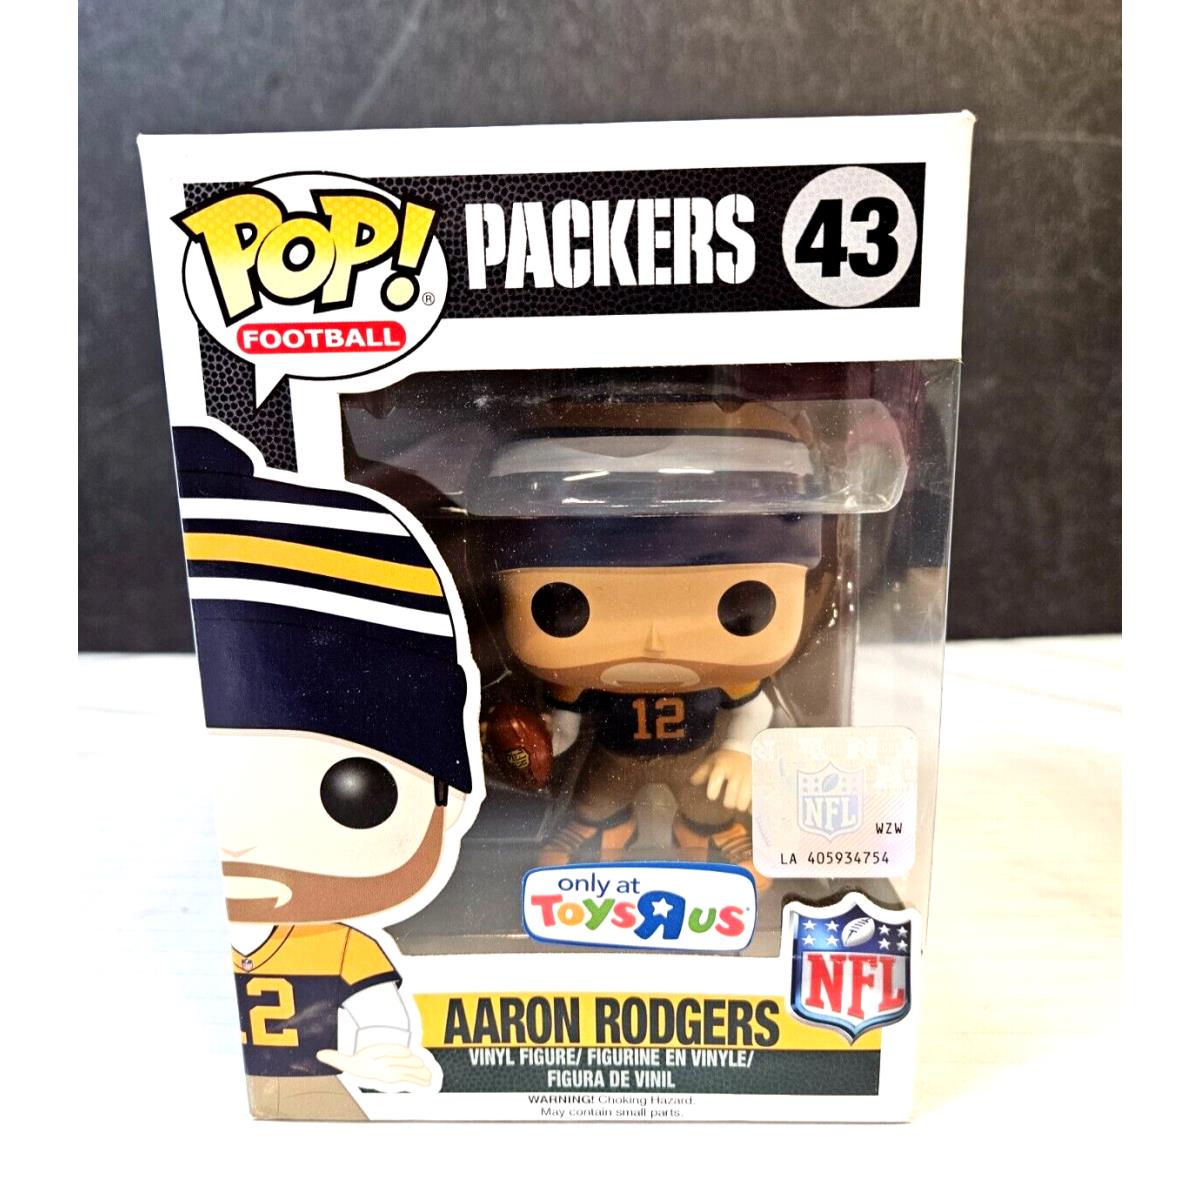 Funko Pop Aaron Rodgers 43 Nfl Football Packers Toys R US